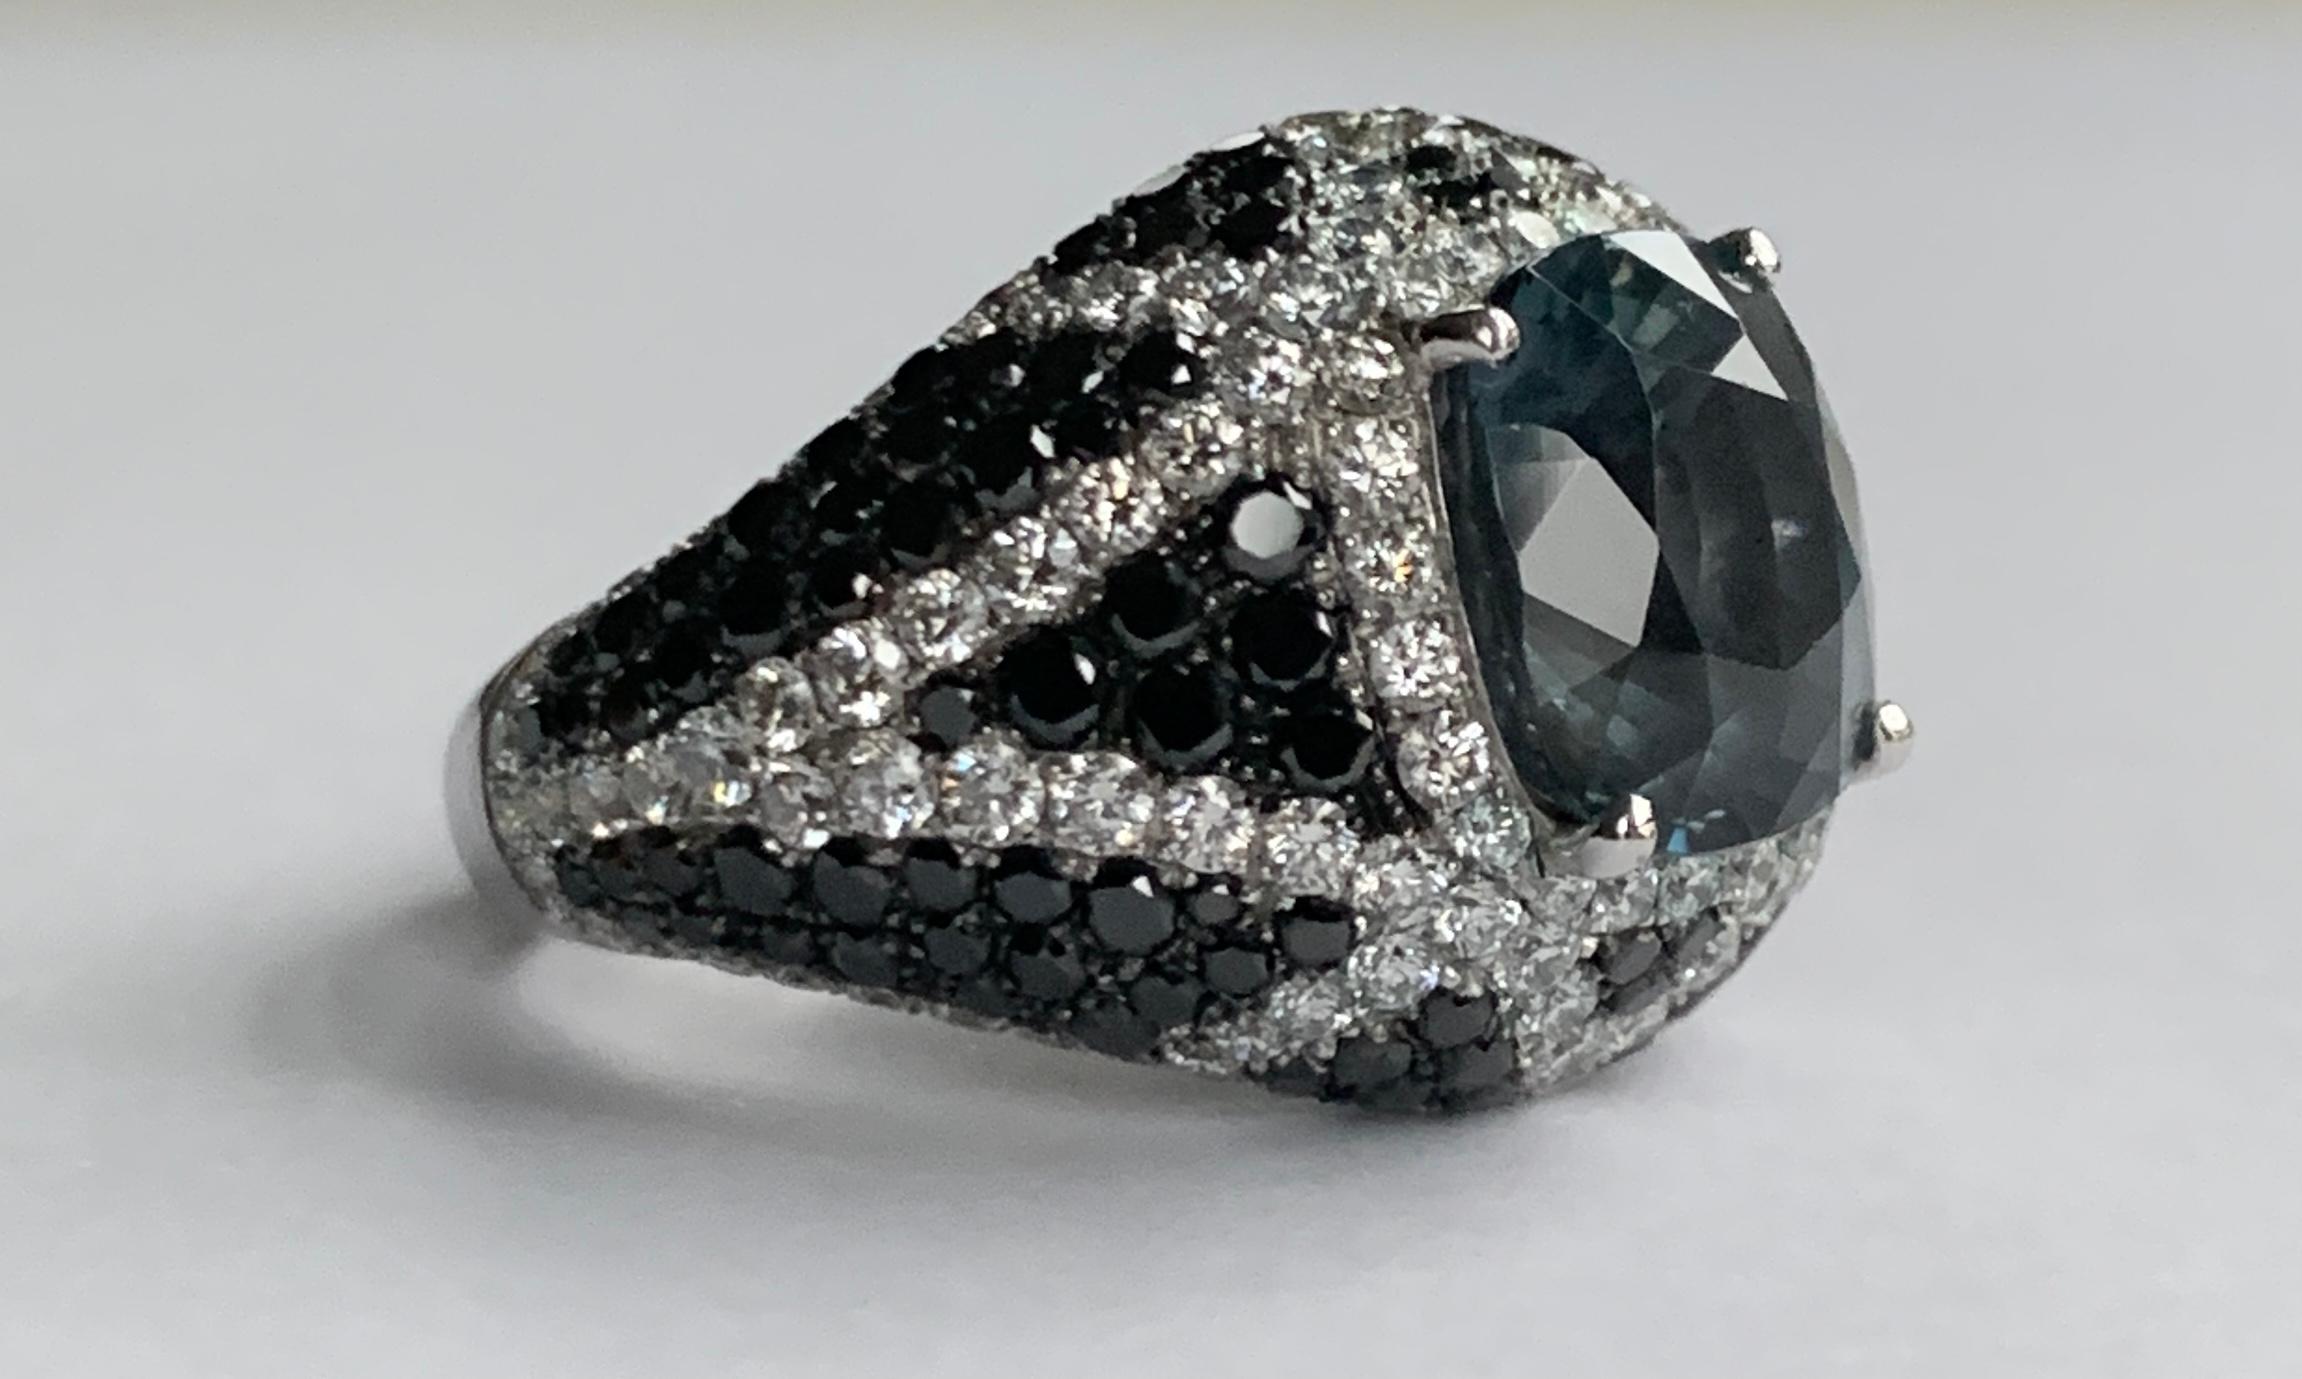 A mesmerising cushion cut blue spinel encircled by a delicate ring of brilliant cut diamonds, surrounded by a glittering pave' of black and white diamonds

Details
Blue Cobalt Spinel Cocktail Ring
- 18 karat White Gold
- 4.57 carat Blue Cobalt